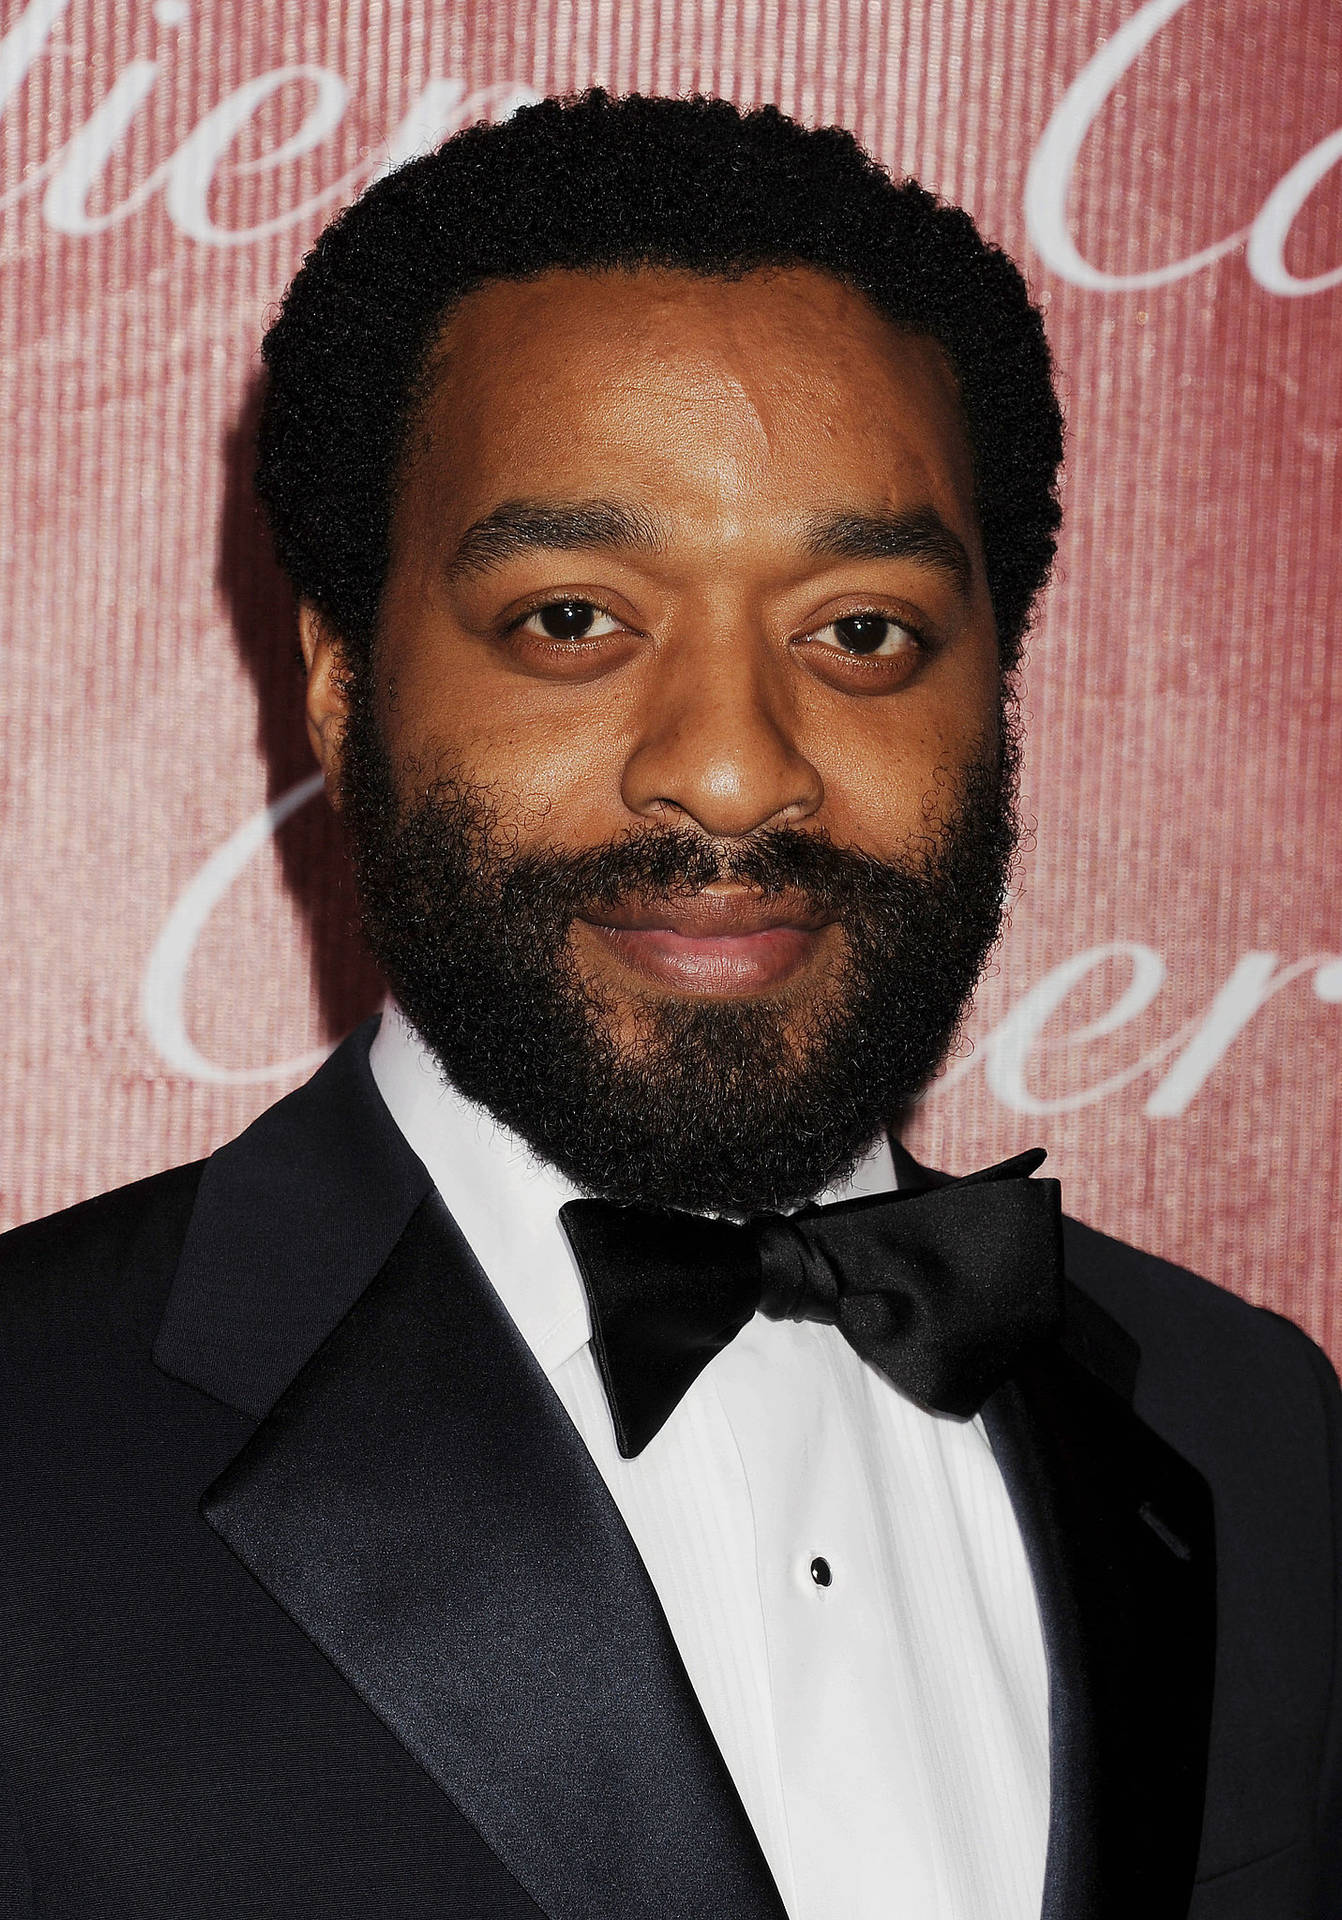 Esteemed actor Chiwetel Ejiofor at the 2014 Palm Springs Festival Awards. Wallpaper